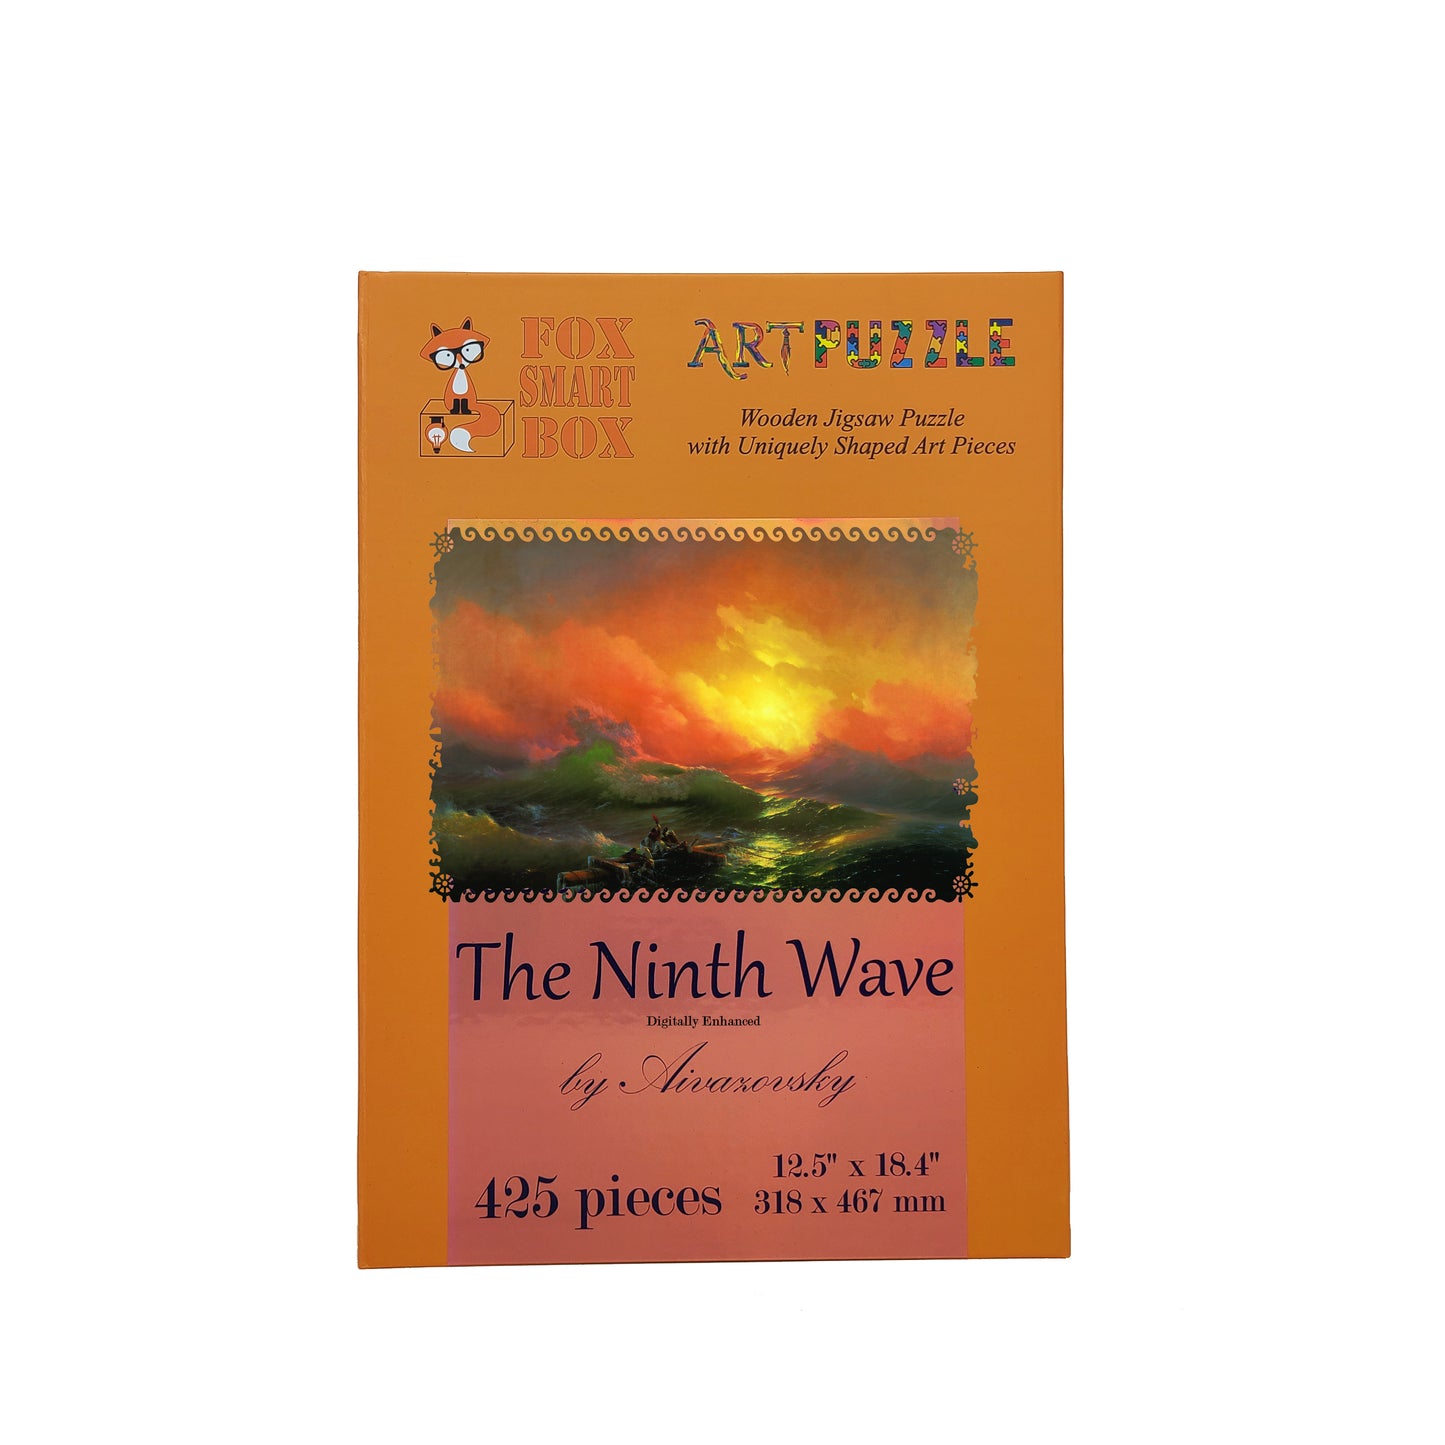 Wooden Jigsaw Puzzle with Uniquely Shaped Pieces for Adults - 425 Pieces - The Ninth Wave (digitally enhanced)